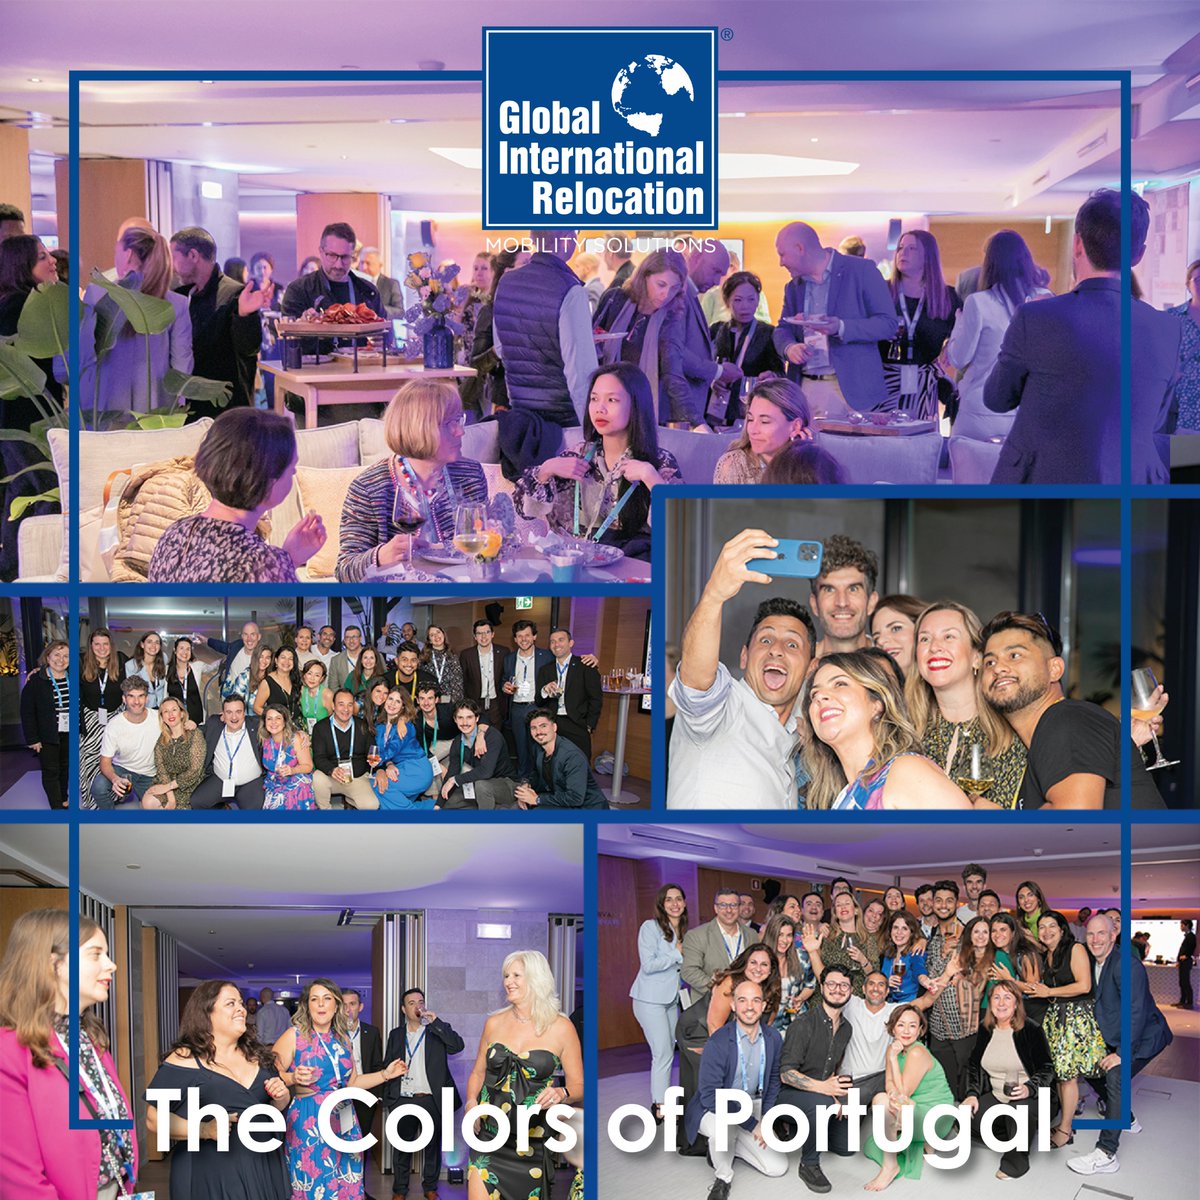 🌍 'The Colors of Portugal' shone bright worldwide! ✨

Last week, as Portugal hosted the @Eura_Relocation convention, we took the opportunity to gather friends, partners, and colleagues for an exceptional night! 🇵🇹

#GlobalMobility #WeCarryForwardFeelings #TheColorsofPortugal